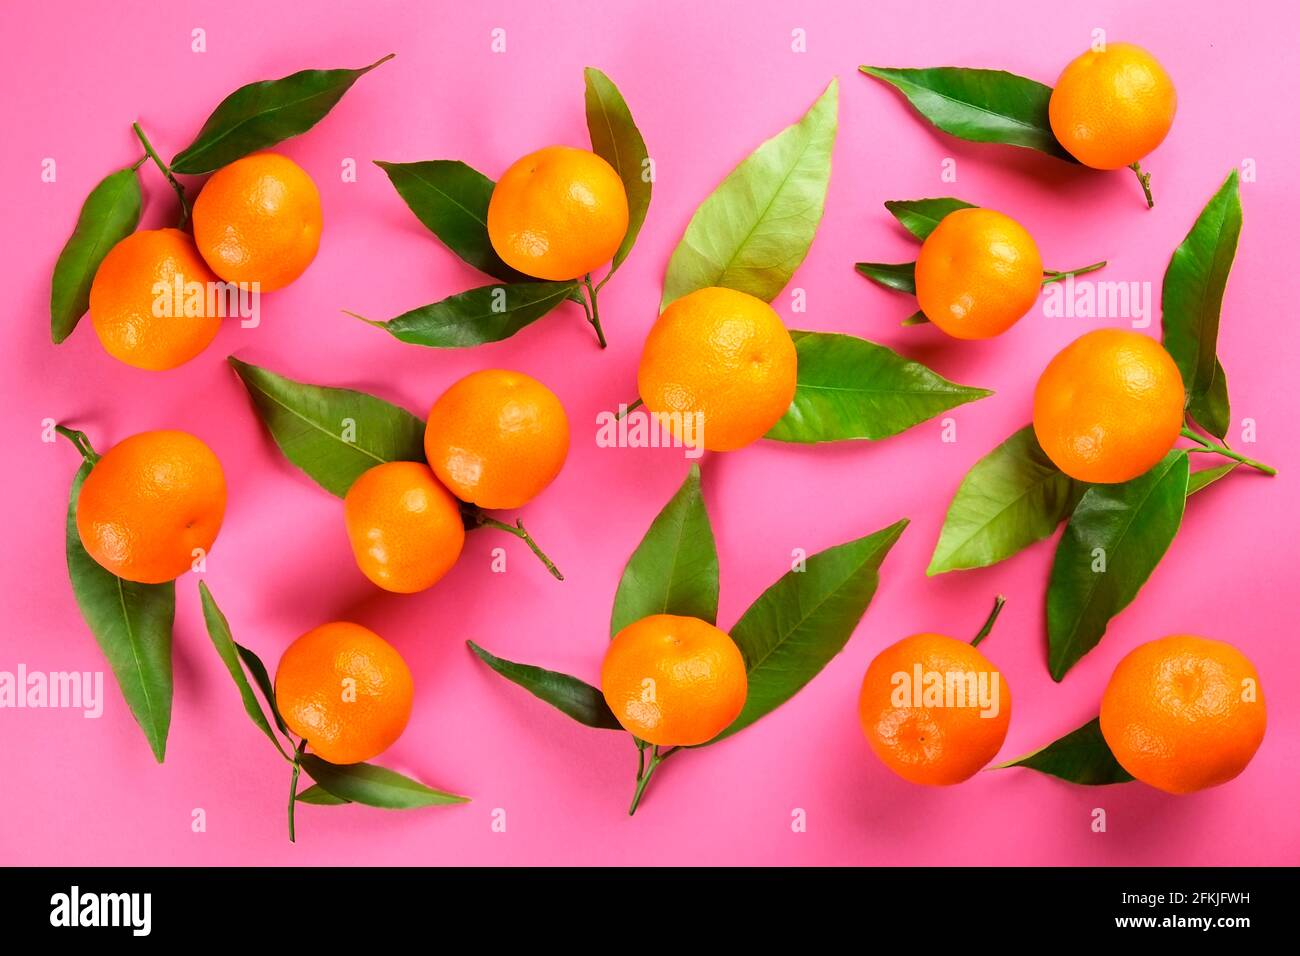 Stylish flat lay composition of juicy tangerine oranges with leaves on solid pink background. Bunch of organic ripe clementine mandarins, raw vegan fo Stock Photo